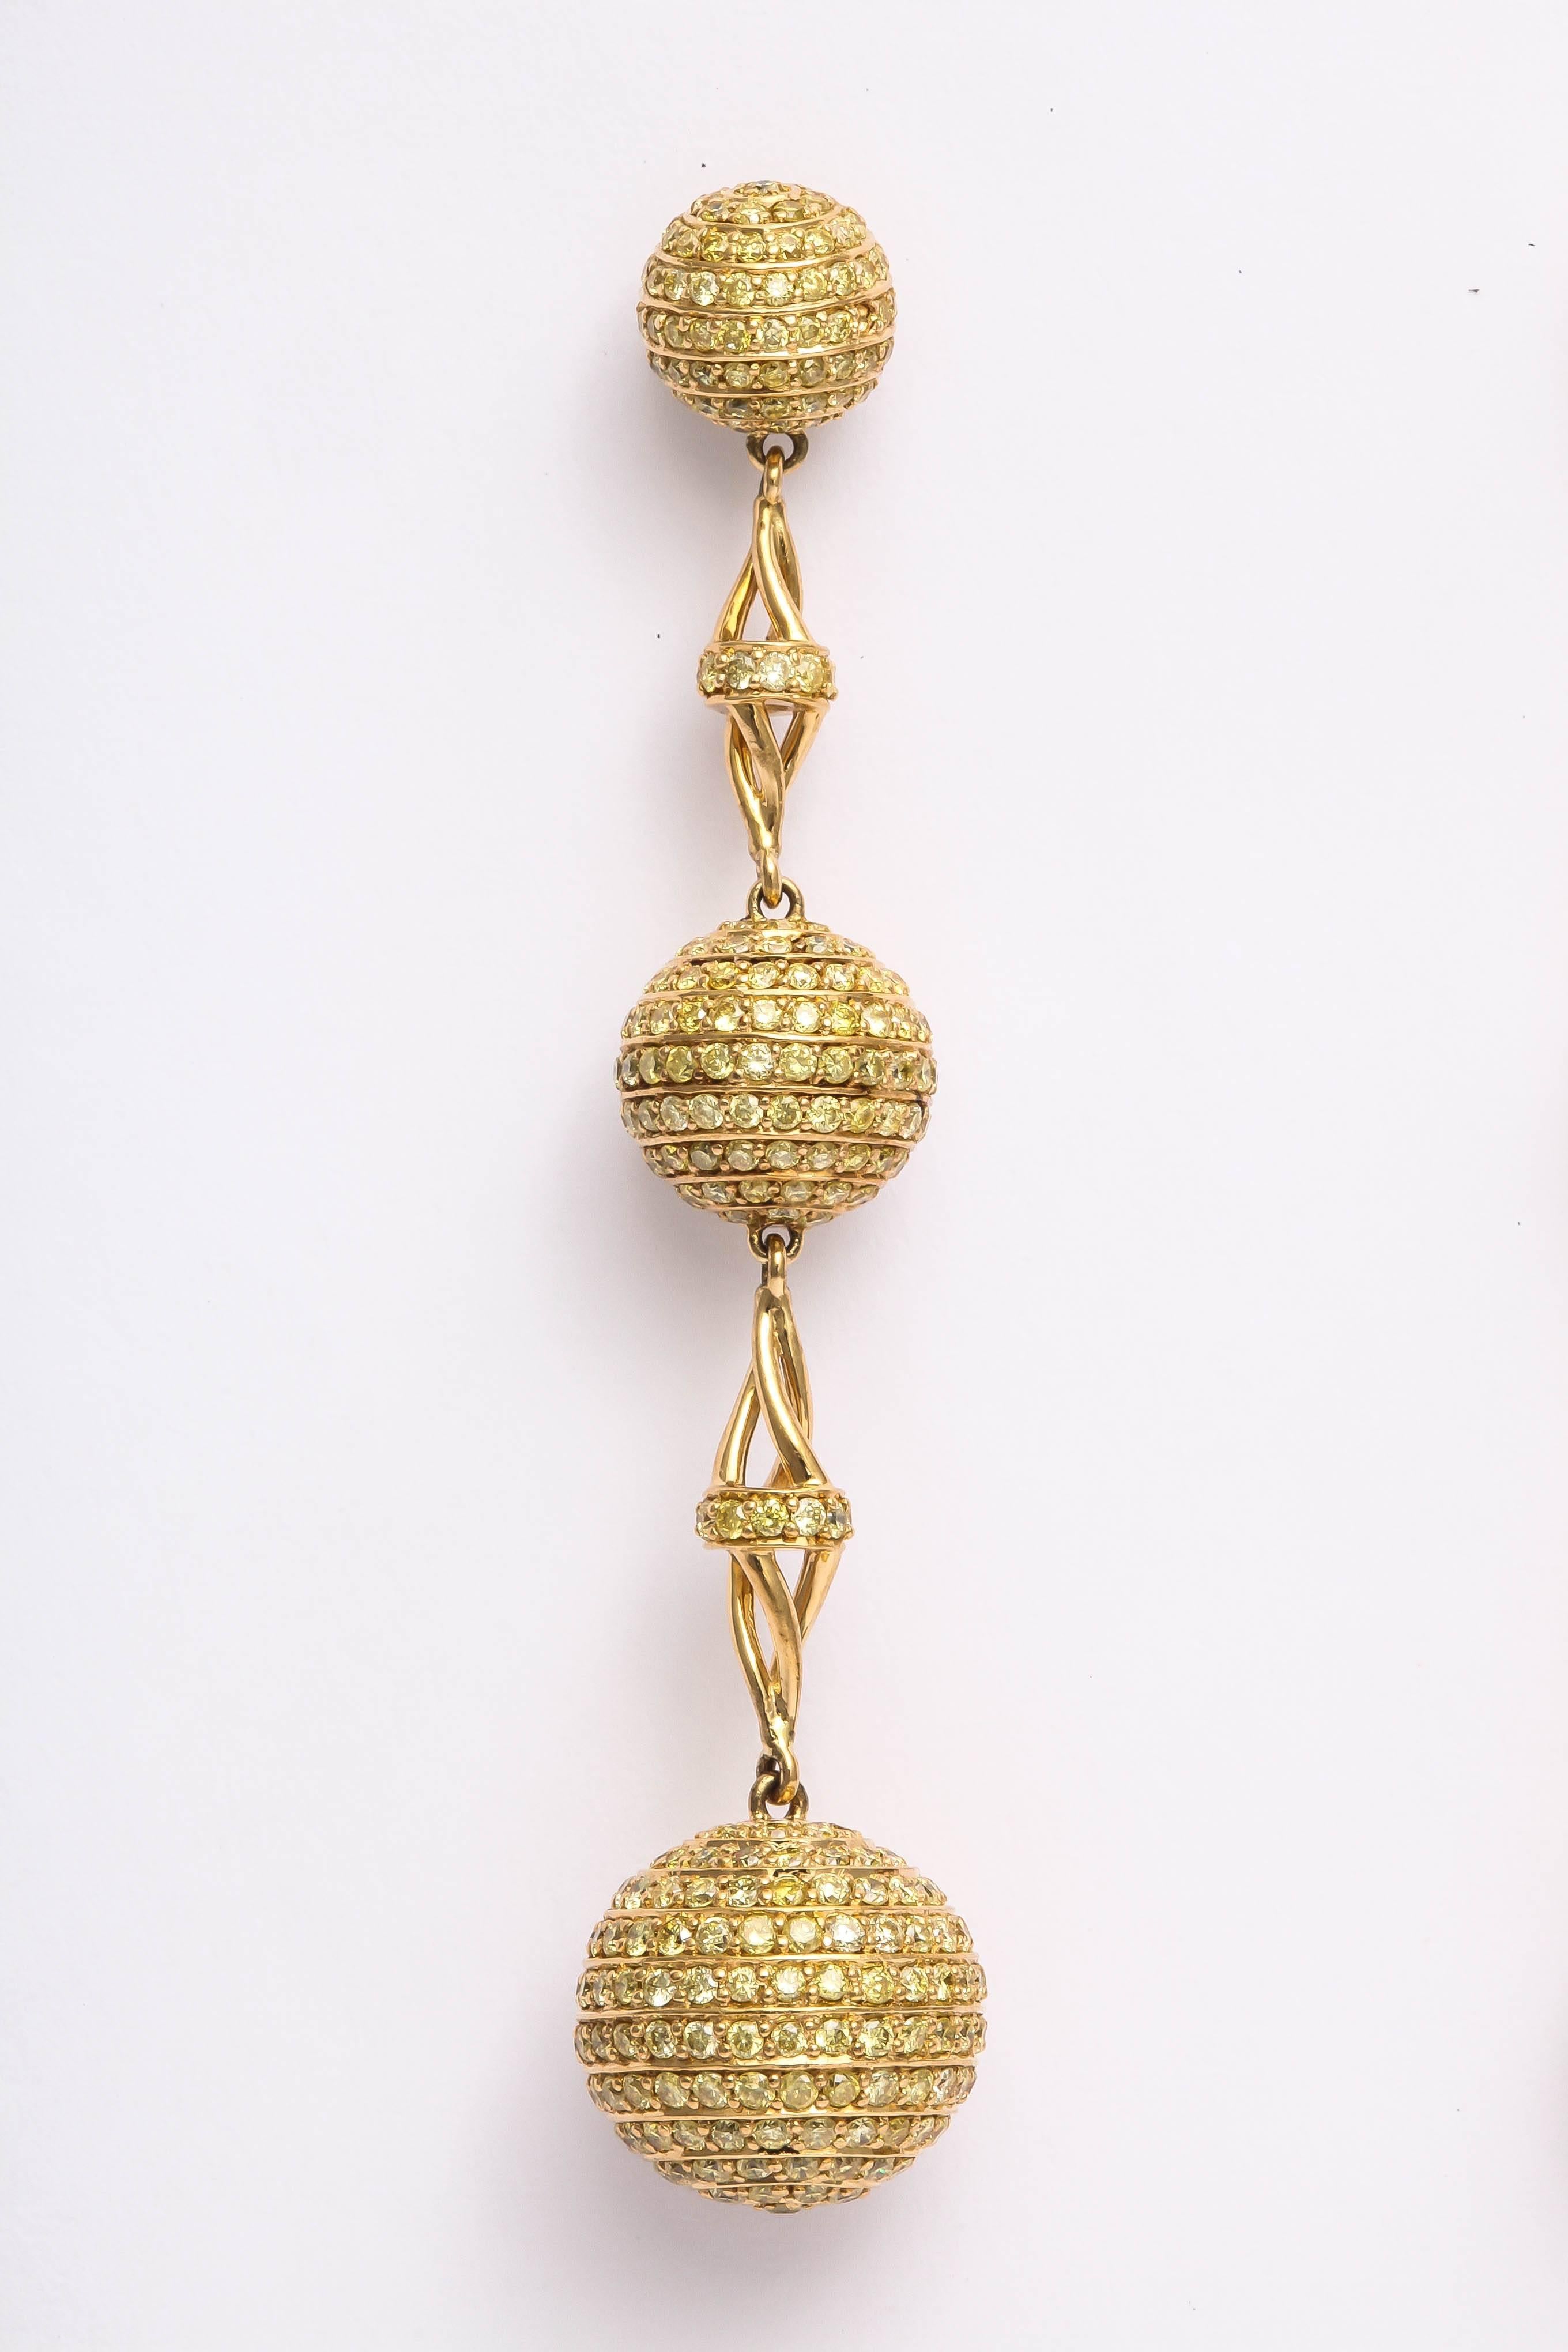 These sensational dangling earrings are made in 18 kt yellow gold and are  beautifully pave set with 966 ( that's right, 966 individual diamonds )fancy yellow color,  brilliant cut melee. The yellow diamonds are VS clarity and the total weight is